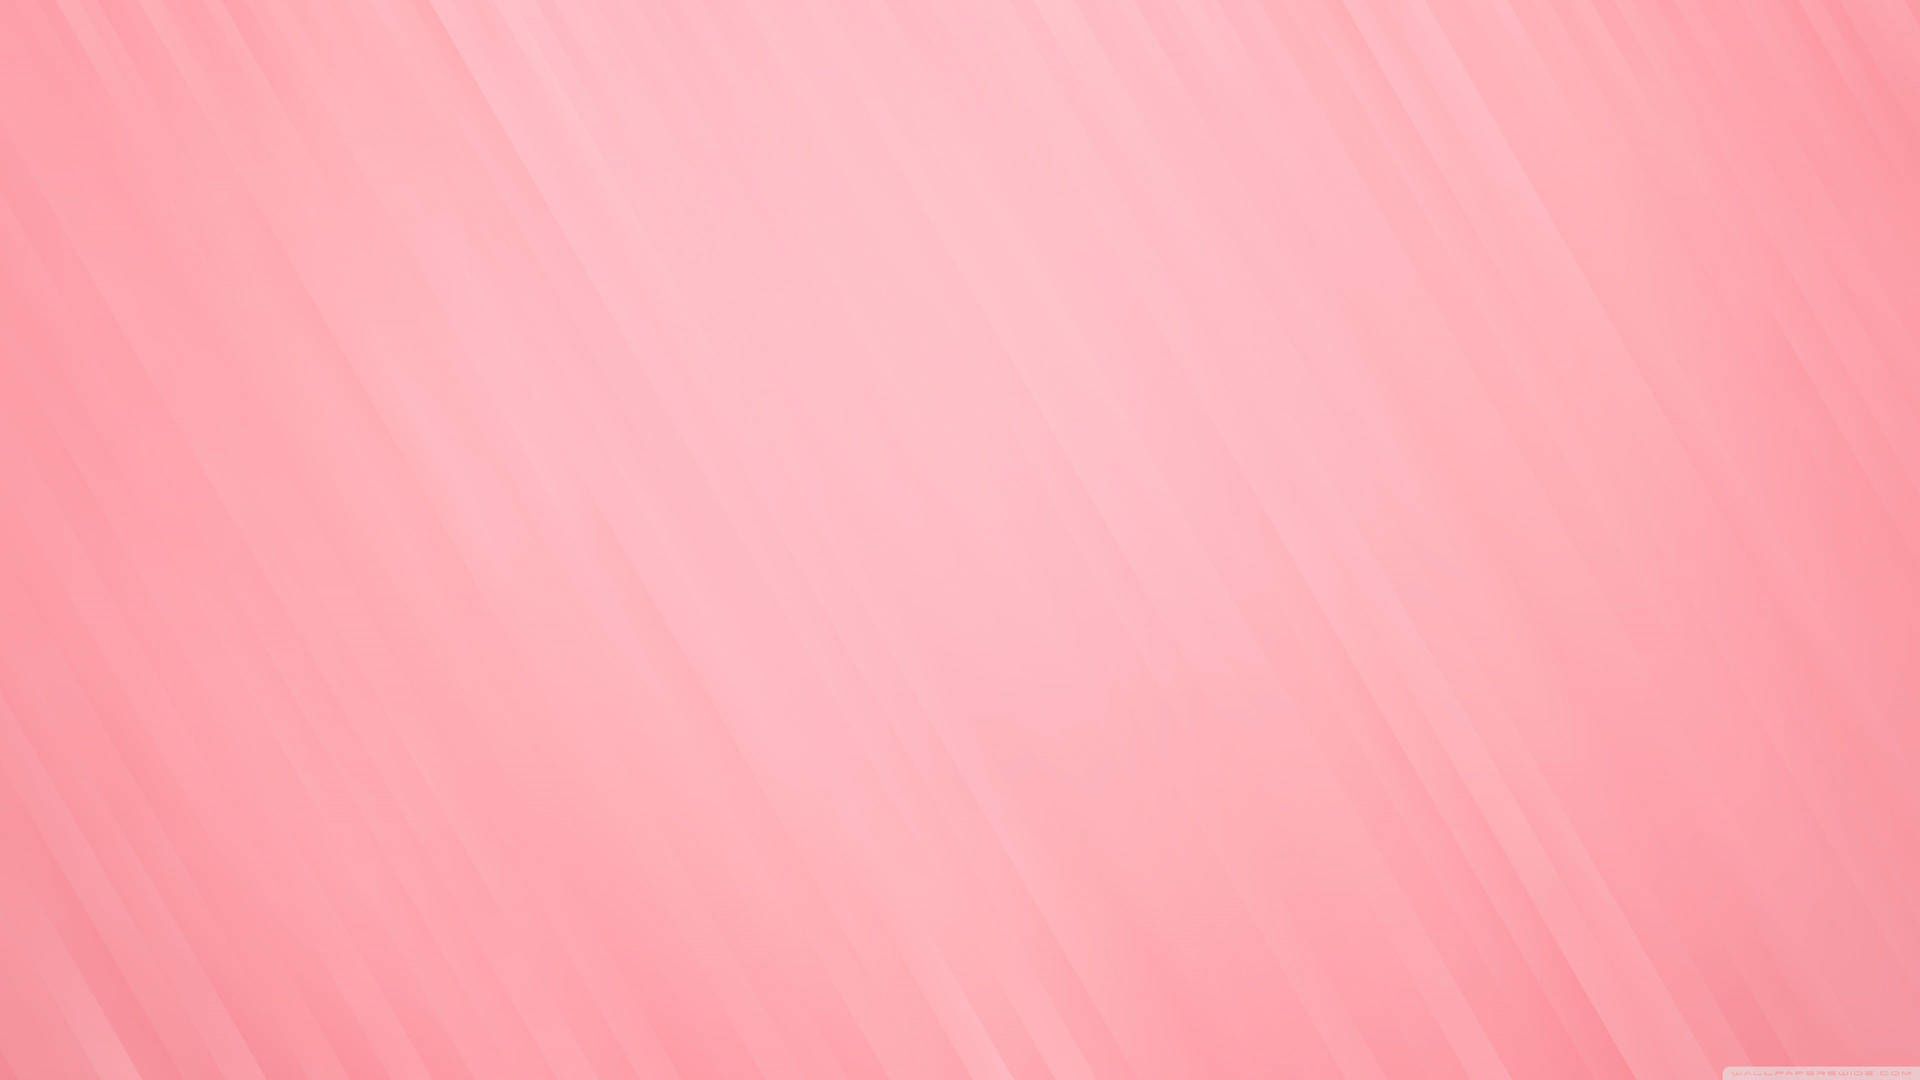 A bright and vibrant pink and white composition Wallpaper